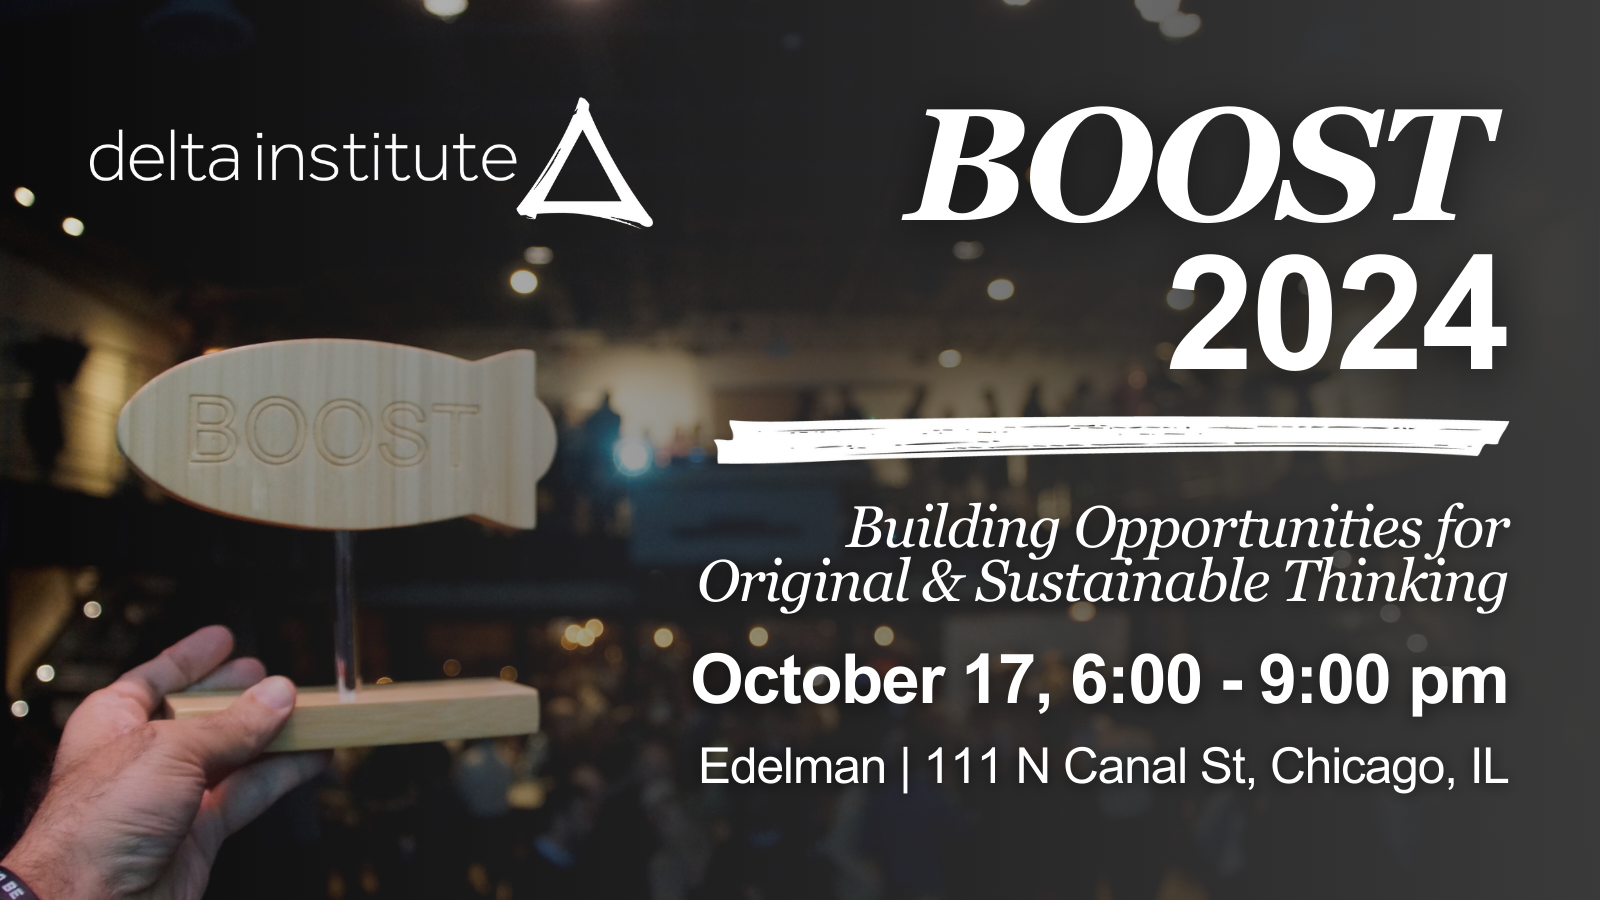 BOOST 2024: October 17th at Edelman, 111 N Canal St, Chicago, IL